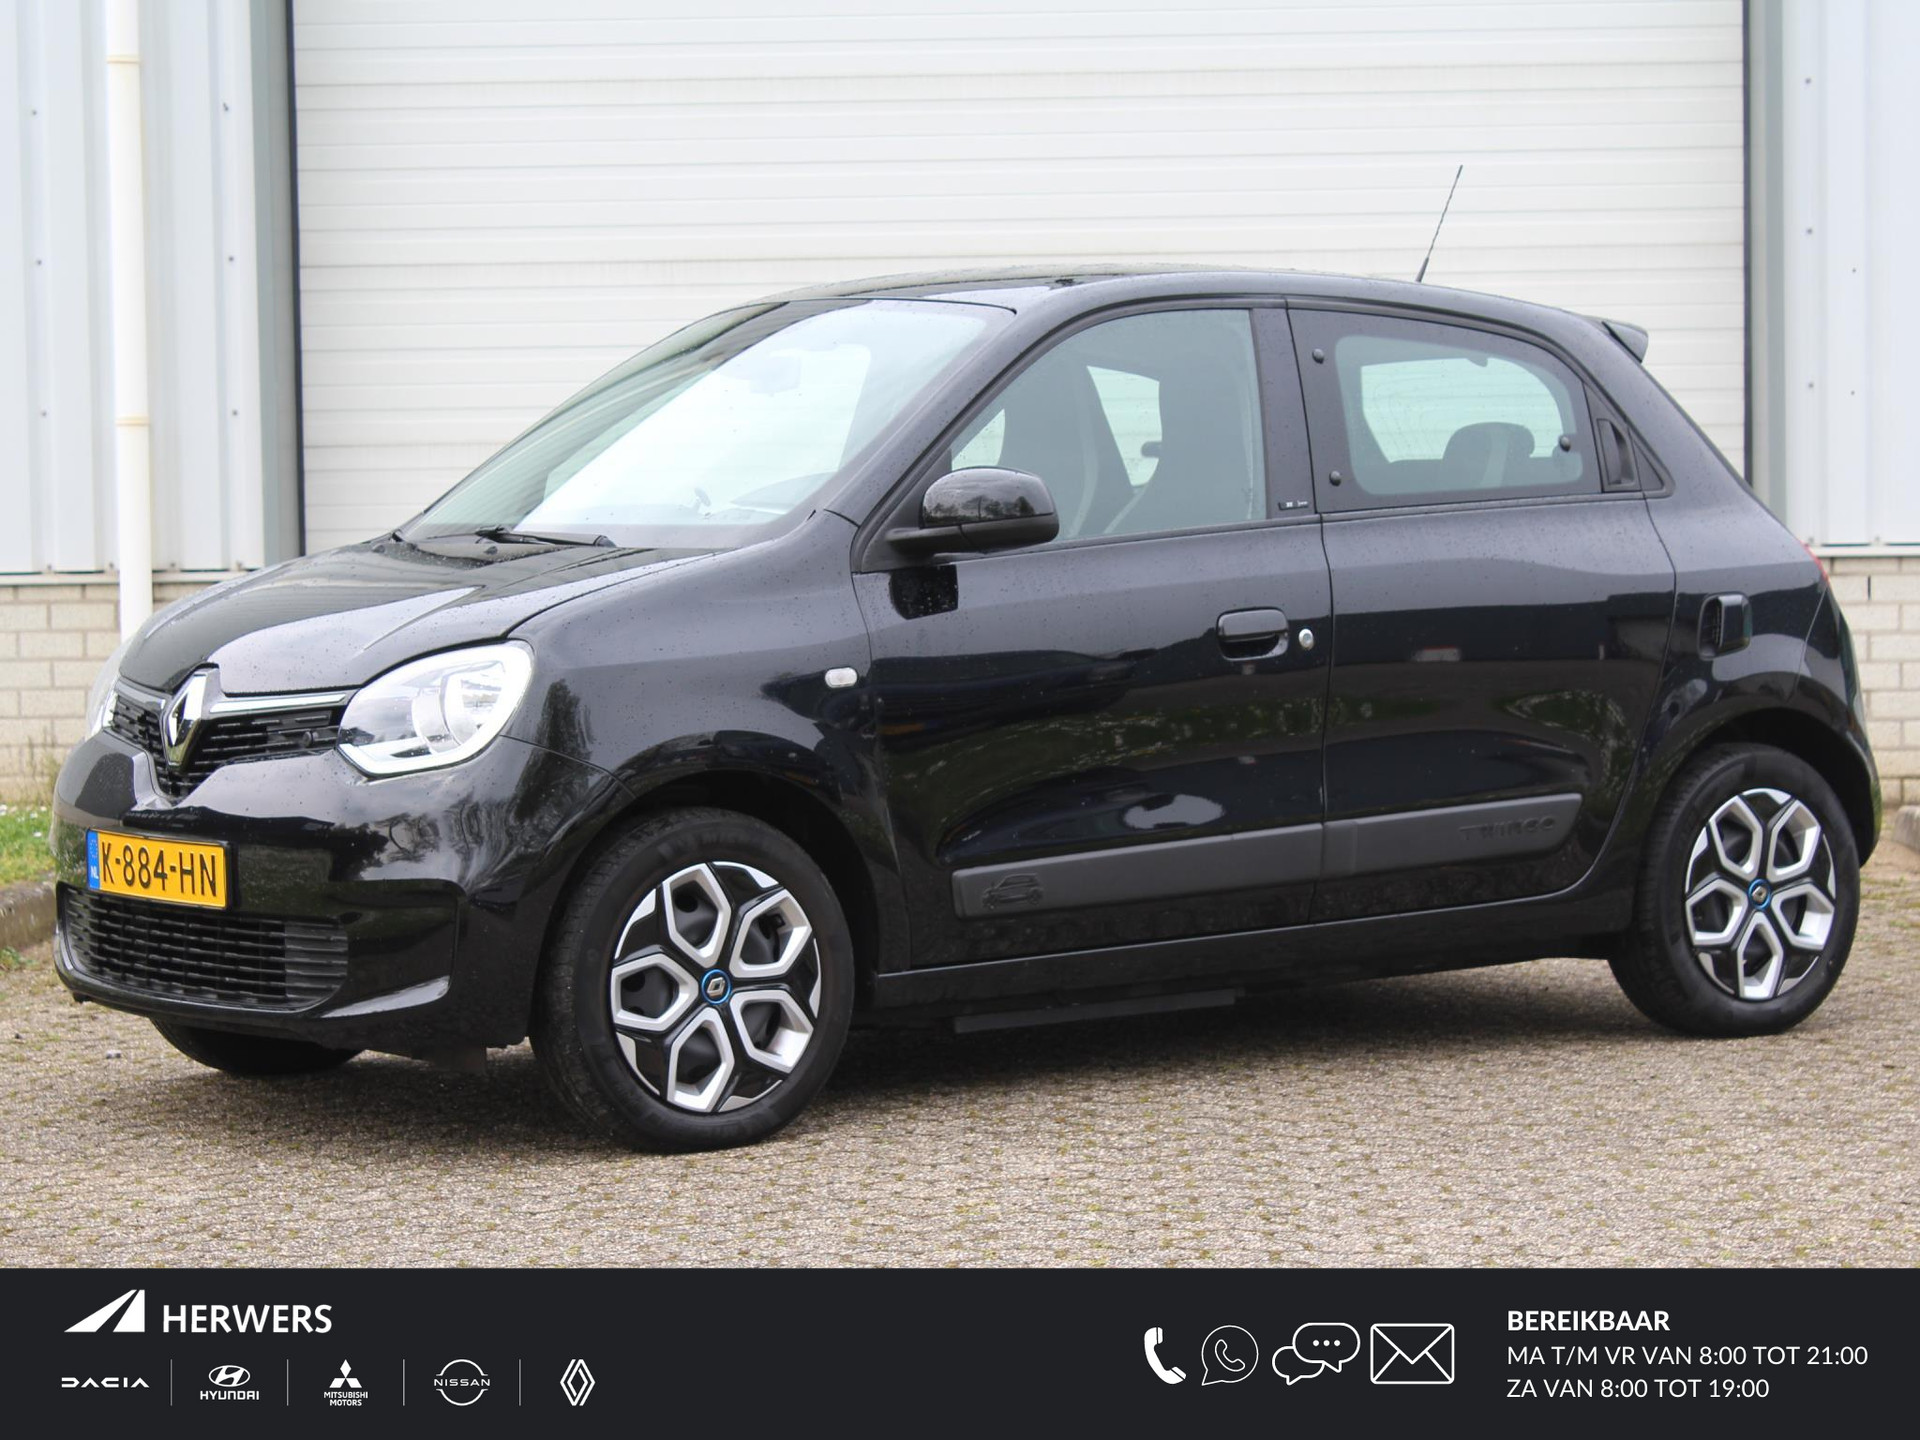 Renault Twingo Z.E. R80 Collection / SUBSIDIE  € 2000,- mogelijk / AUTOMAAT / Navigatiesysteem / Airco / Apple Car Play & Android Auto / DAB / Led dagrijverlichting / Metaalkleur / Cruise control